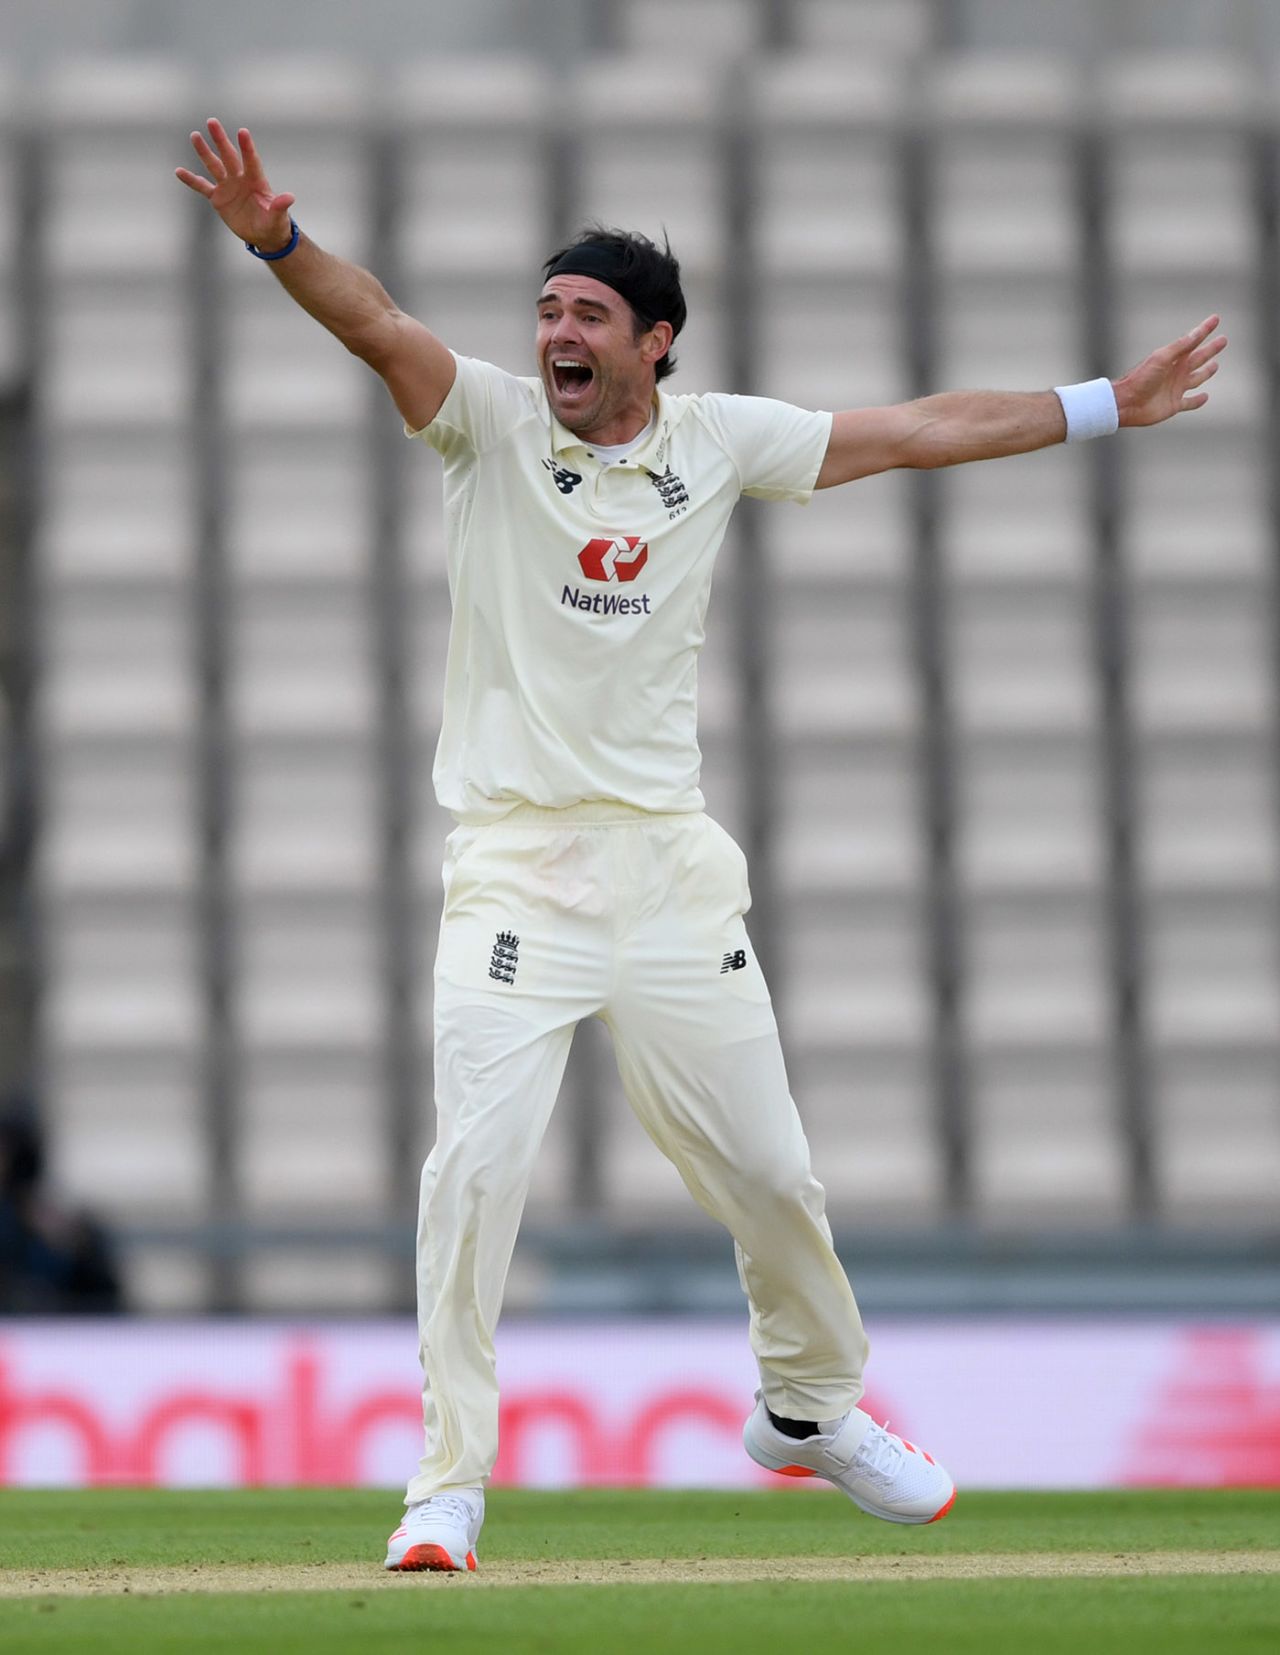 James Anderson appeals, England v West Indies, 1st Test, day 2, Southampton, July 09, 2020